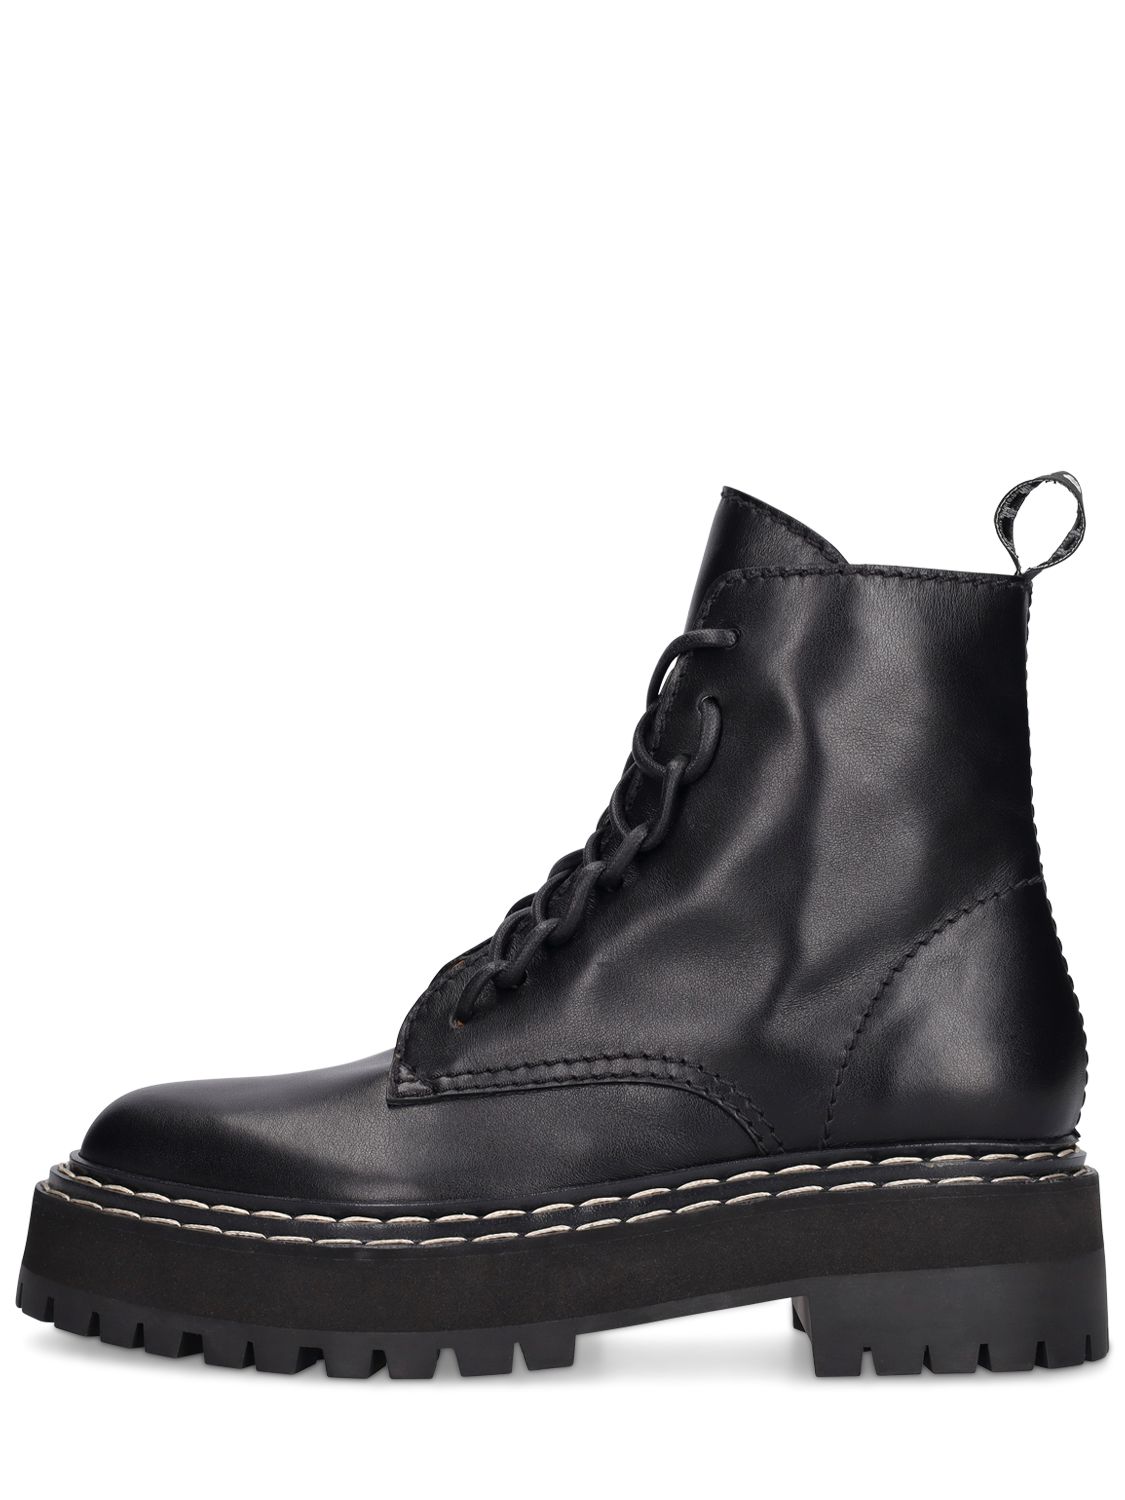 30mm Lug Sole Leather Combat Boots